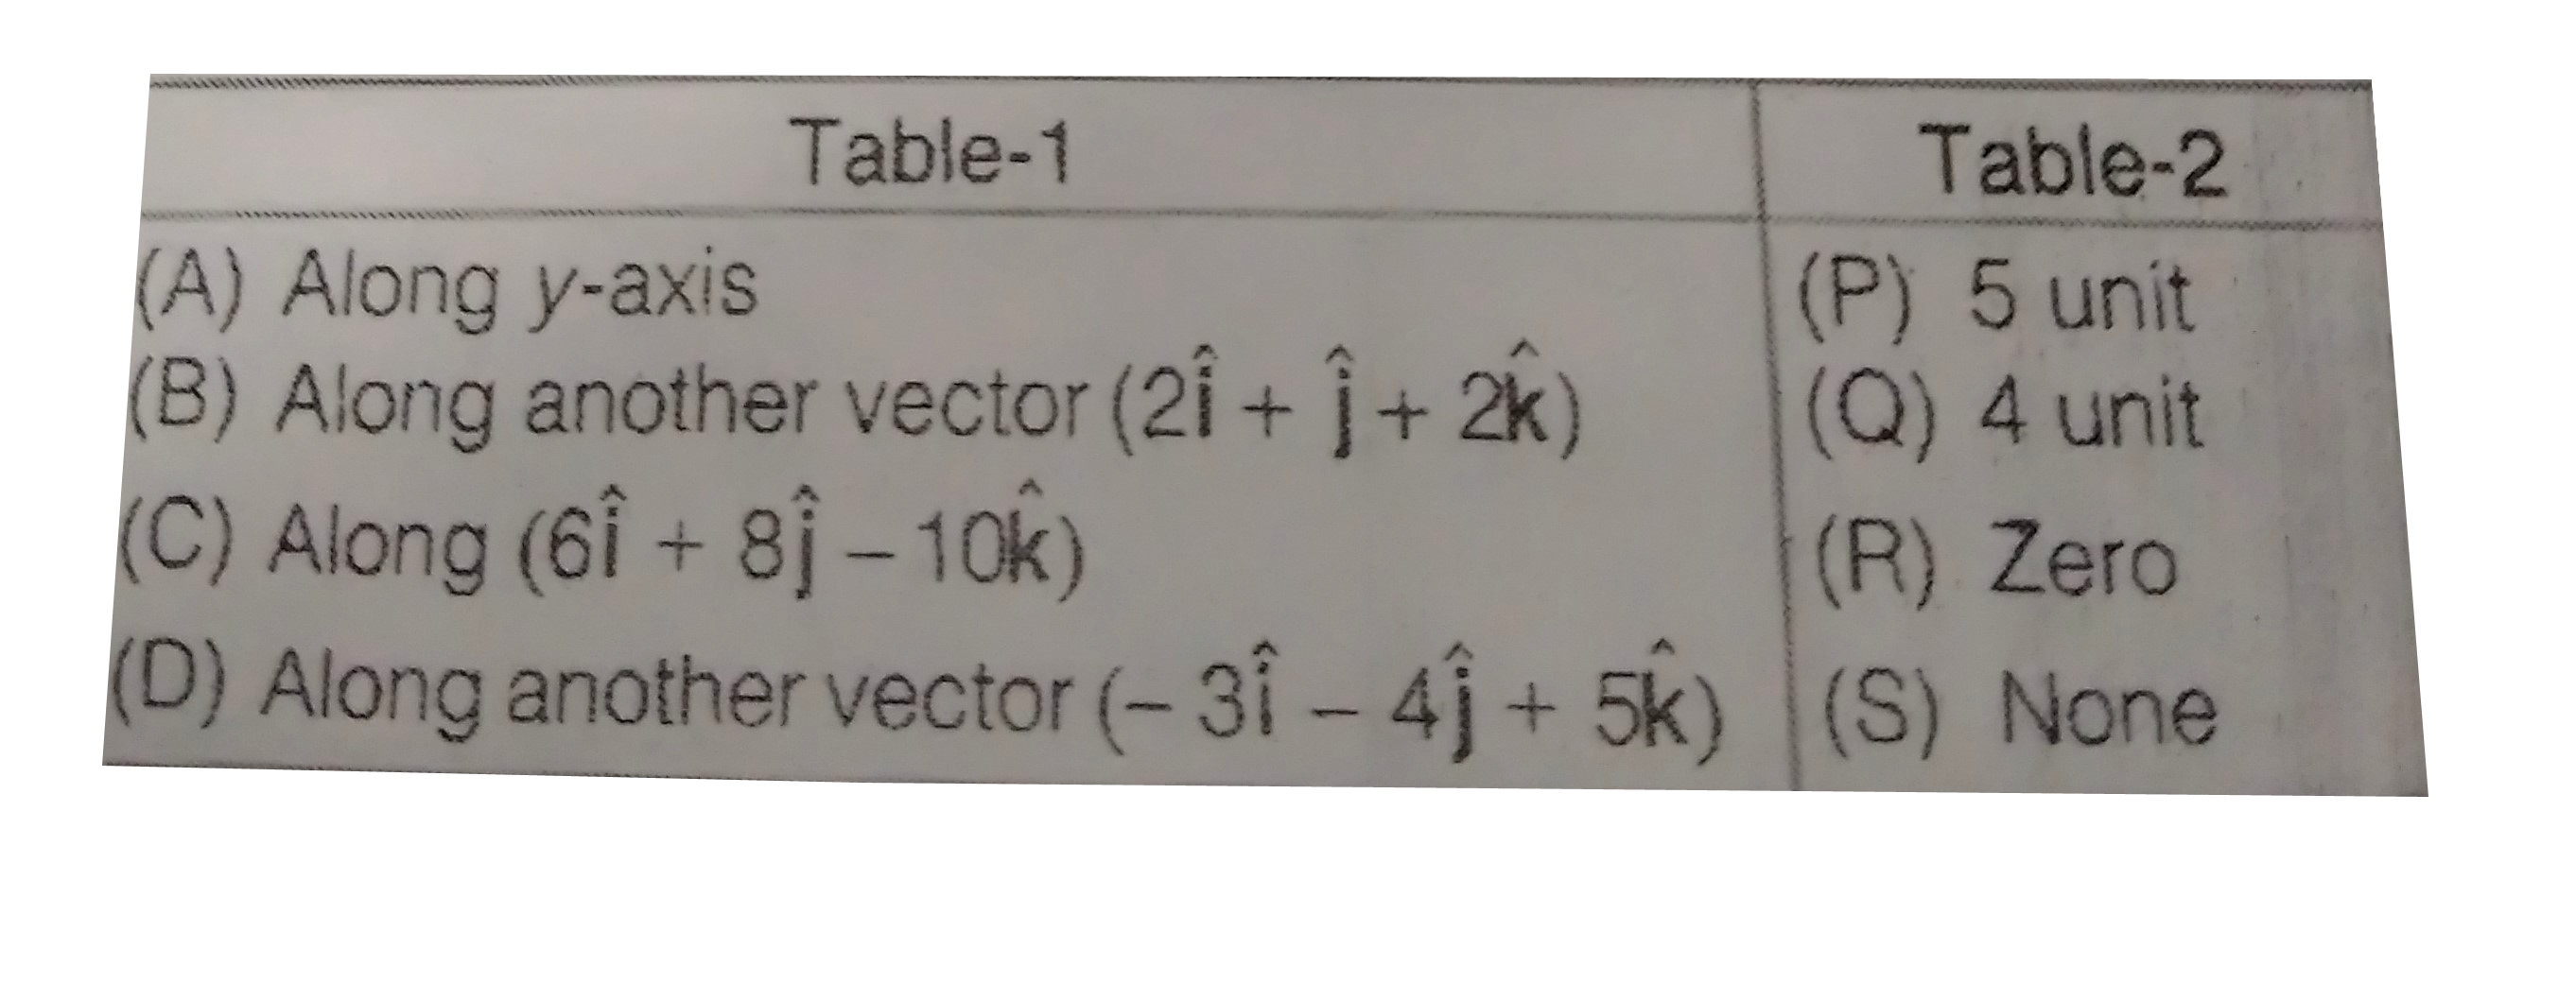 For component of a vector A=(3hati+4hatj-5hatk), match the following table